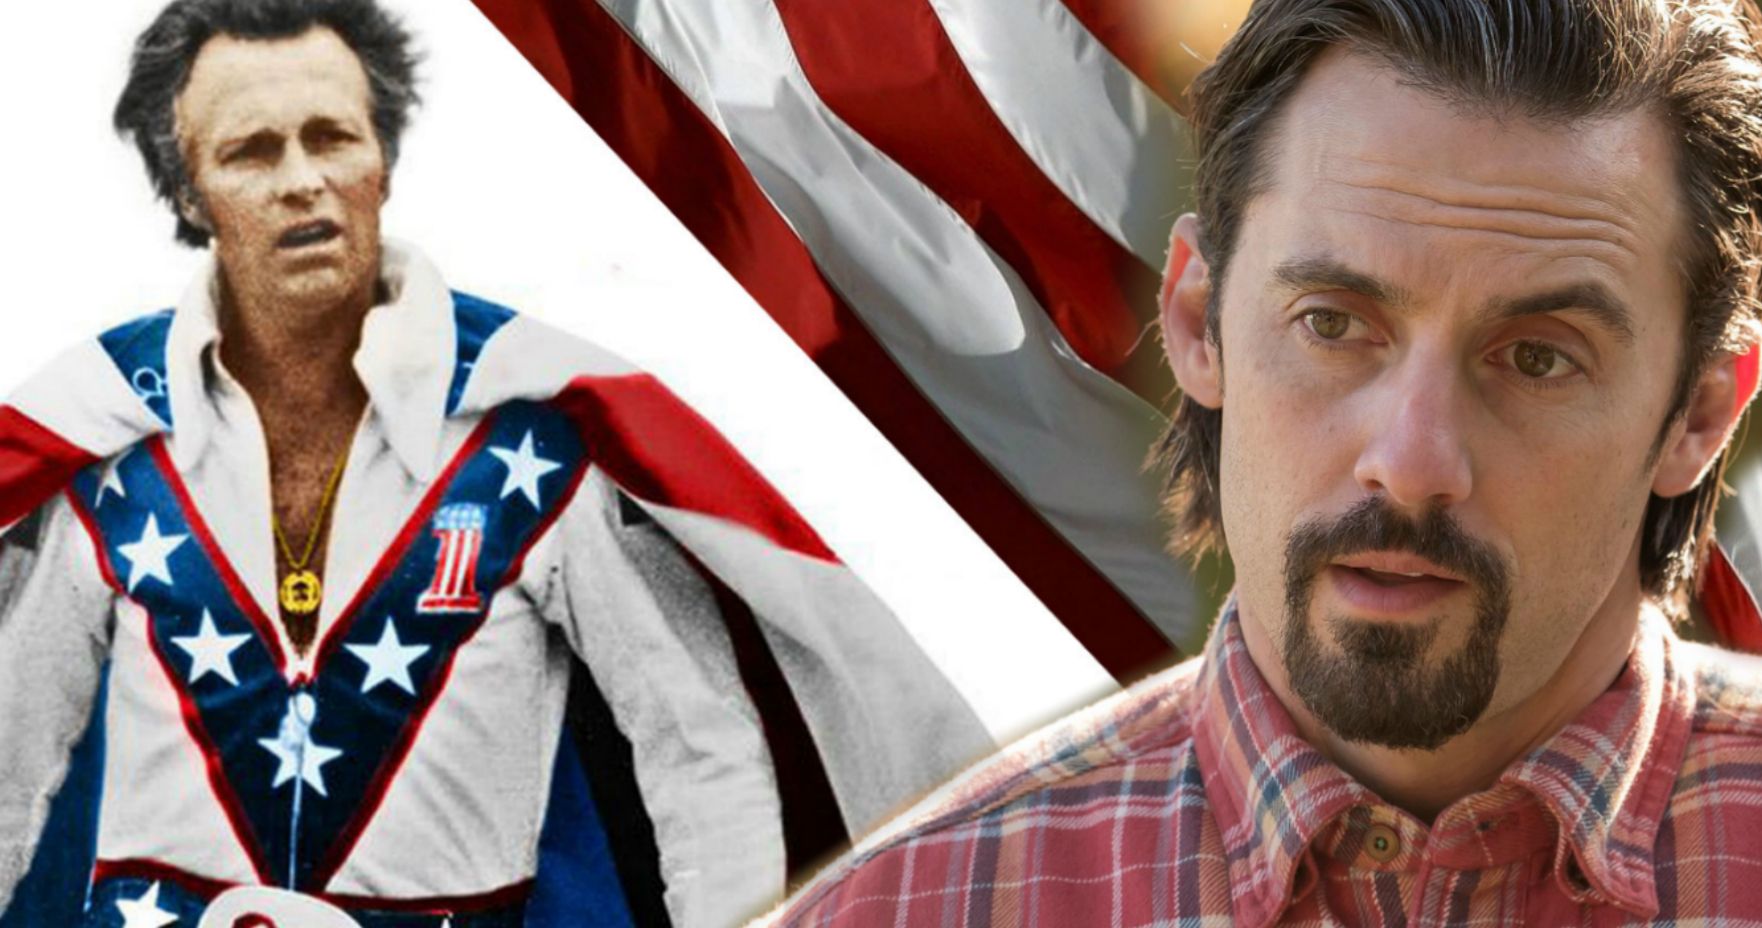 Evel Knievel Miniseries Gets This Is Us Star Milo Ventimiglia as Legendary Daredevil